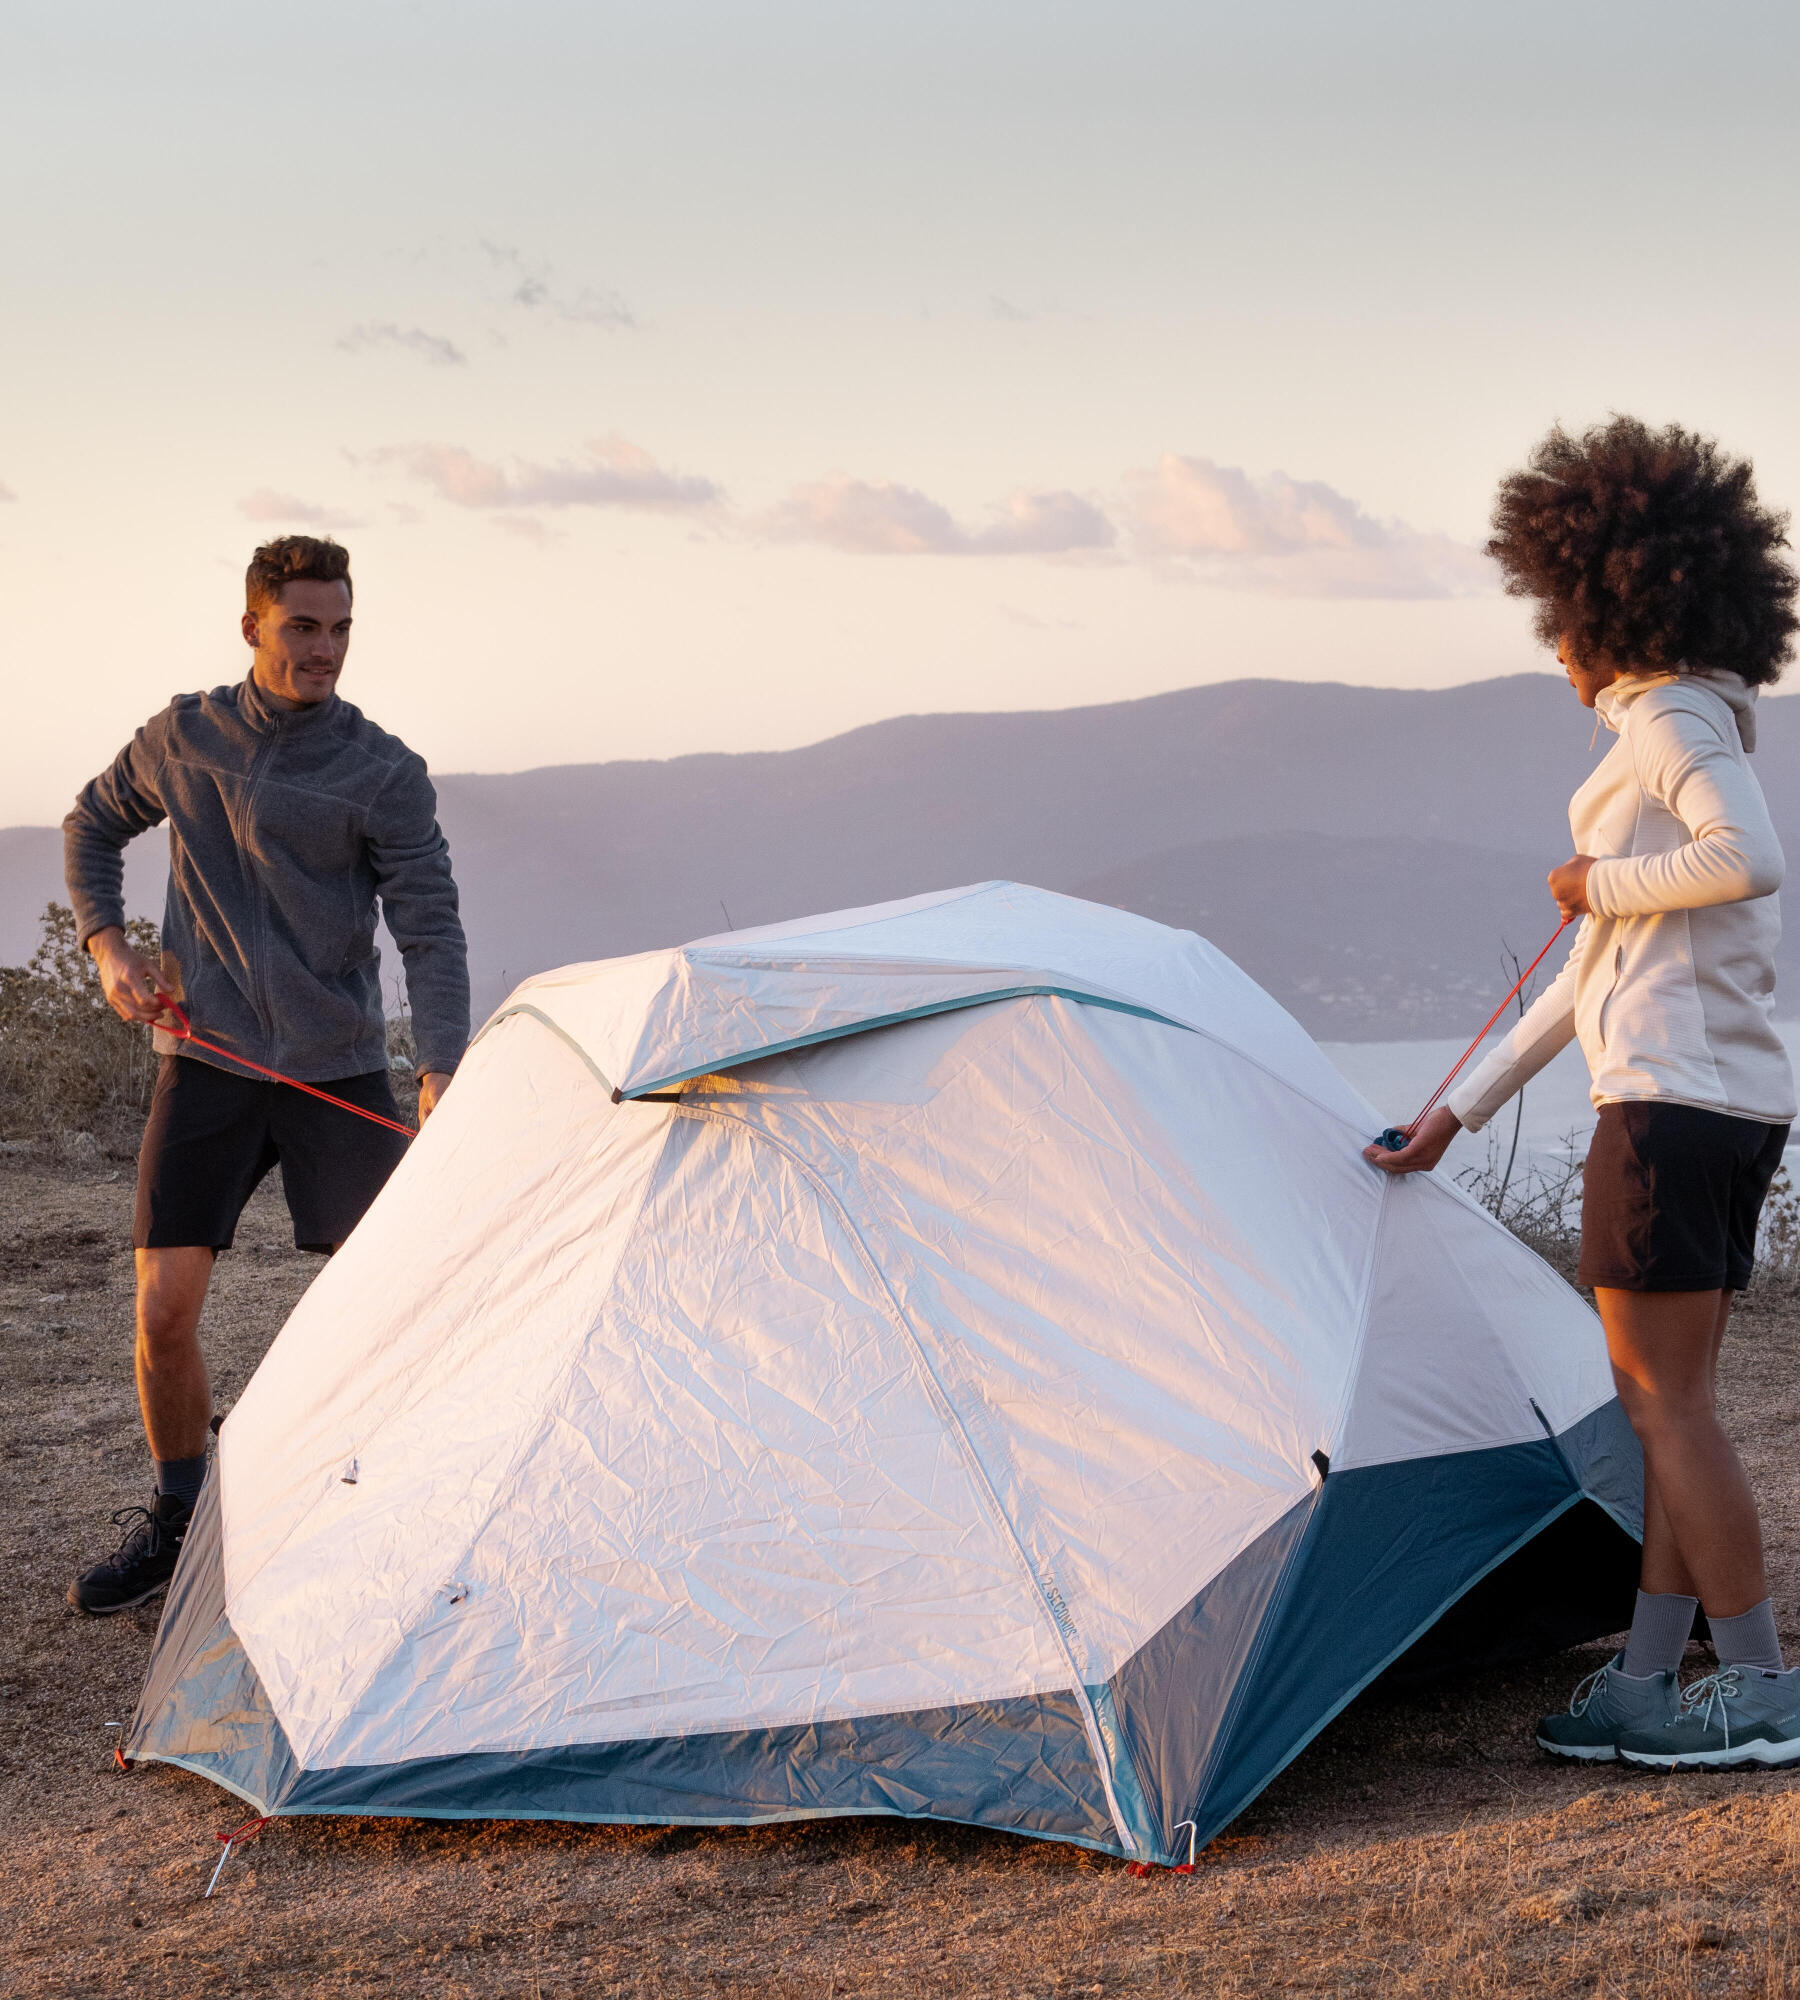 How do I choose my tent? Camping or trekking tent?